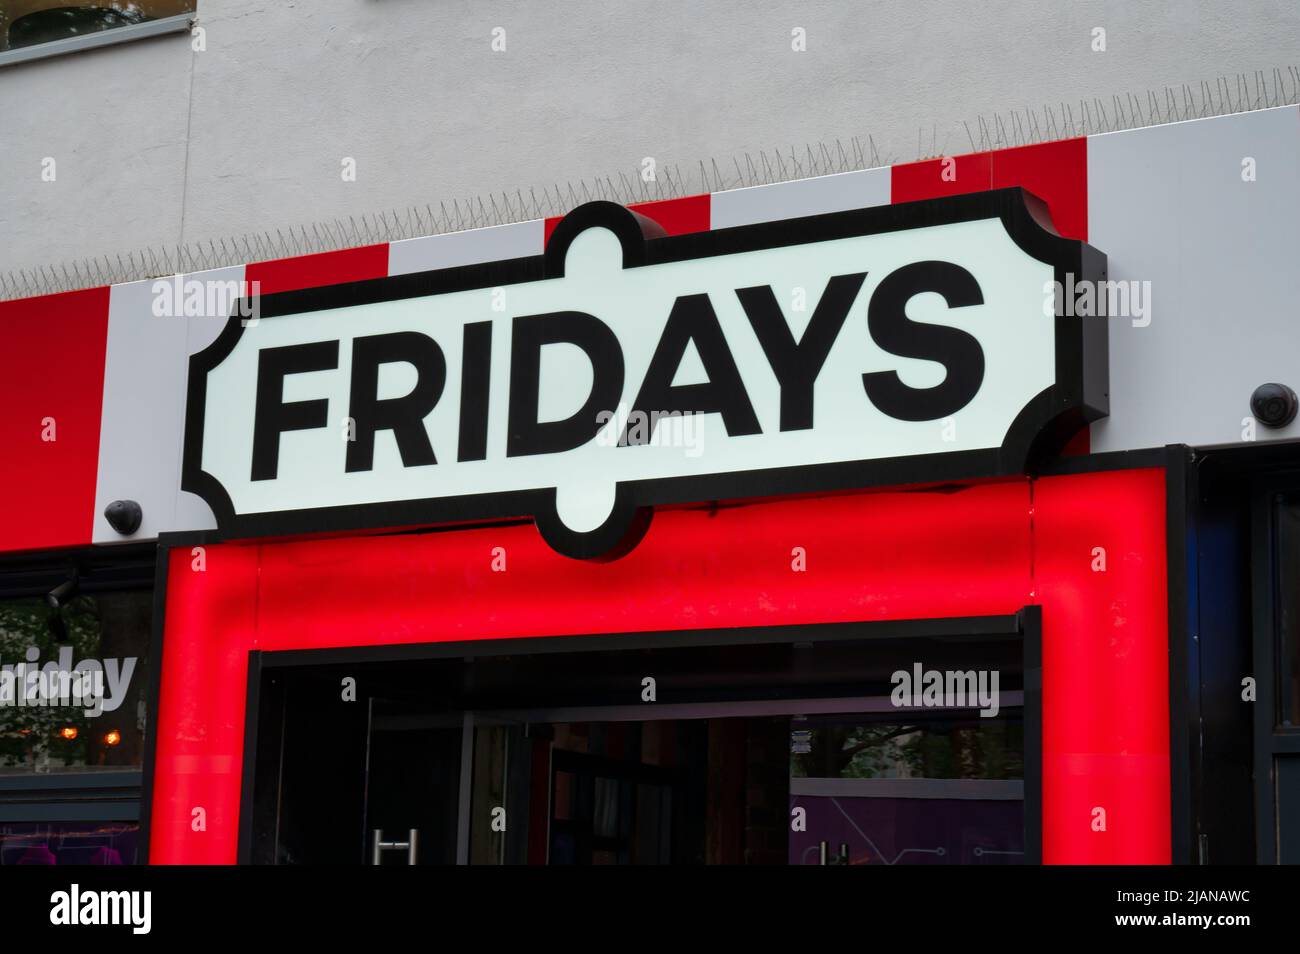 London, UK- May 3, 2022: The sign for Fridays restaurant in London Stock Photo